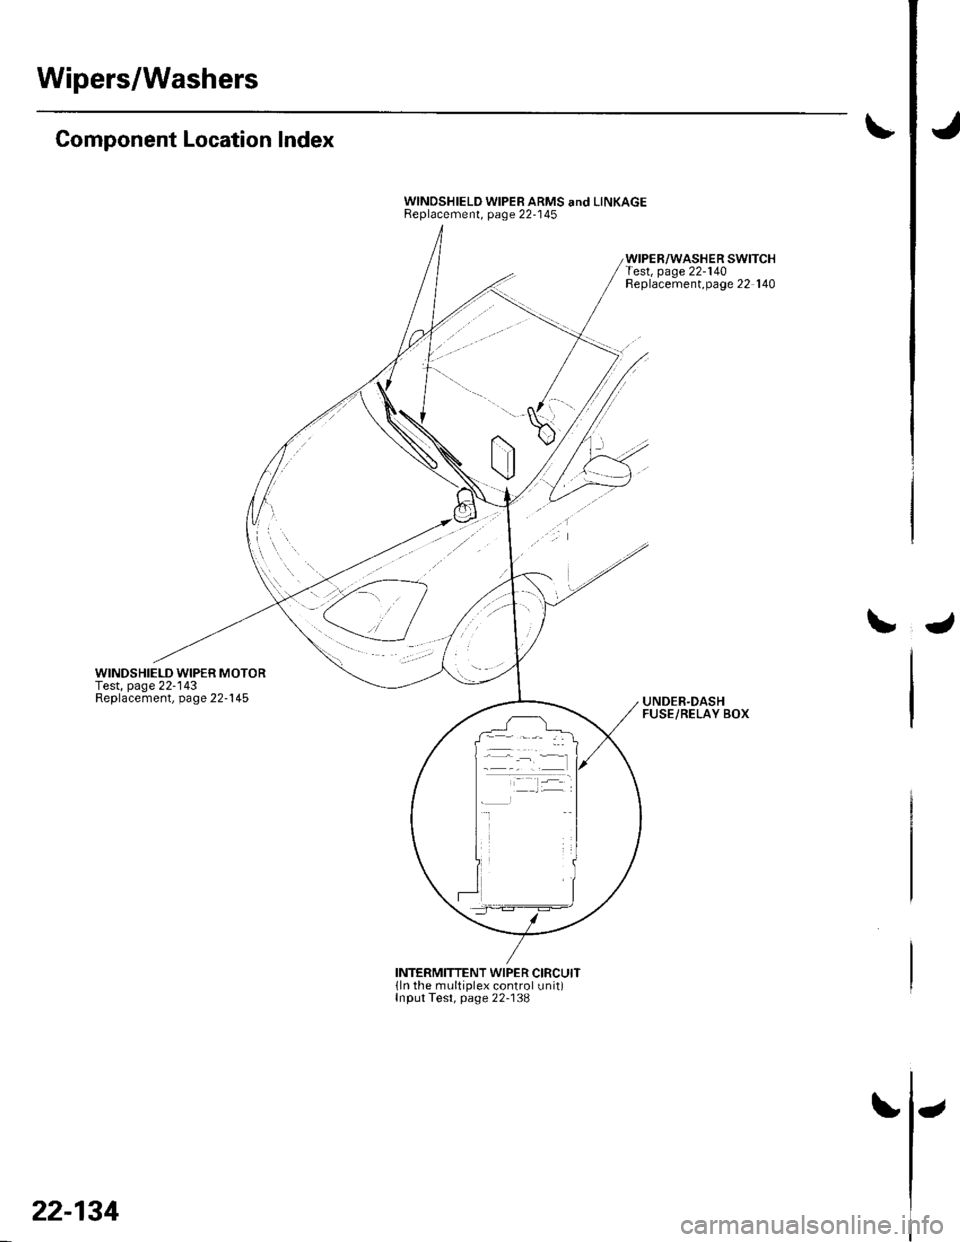 HONDA CIVIC 2003 7.G Workshop Manual Wipers/Washers
Component Location Index
WINDSHIELD WIPER MOTORTest, page 22-143Replacement, page 22-145
WINDSHIELD WIPER ARMS and LINKAGEReplacement, page 22-145
WIPER/WASHER SWITCHTest, page 22-140